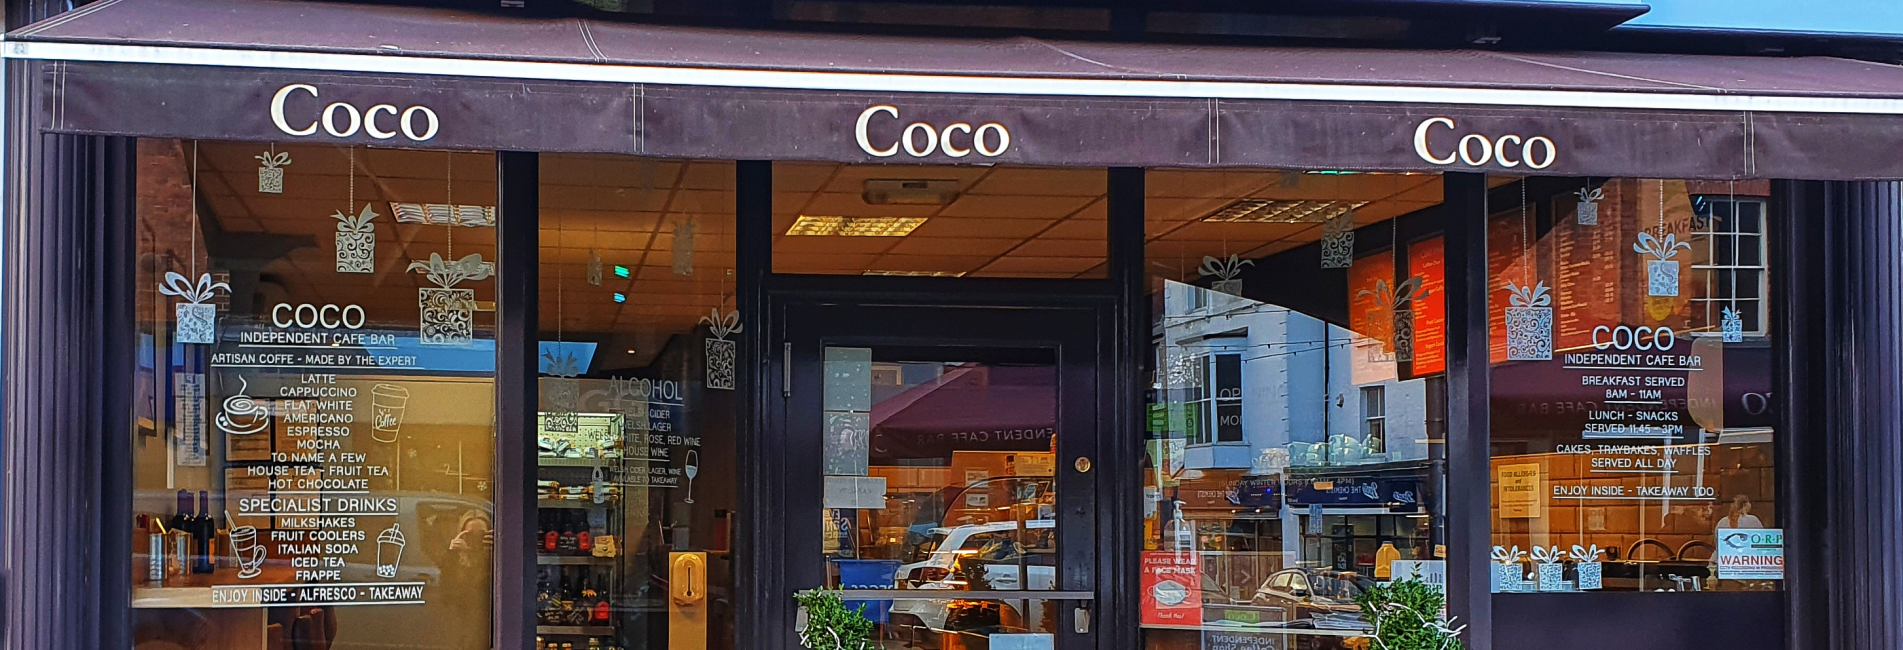 Coco coffee house in Welshpool, Powys, has discovered that there are greater benefits to having a CCTV surveillance system installed than just for security.